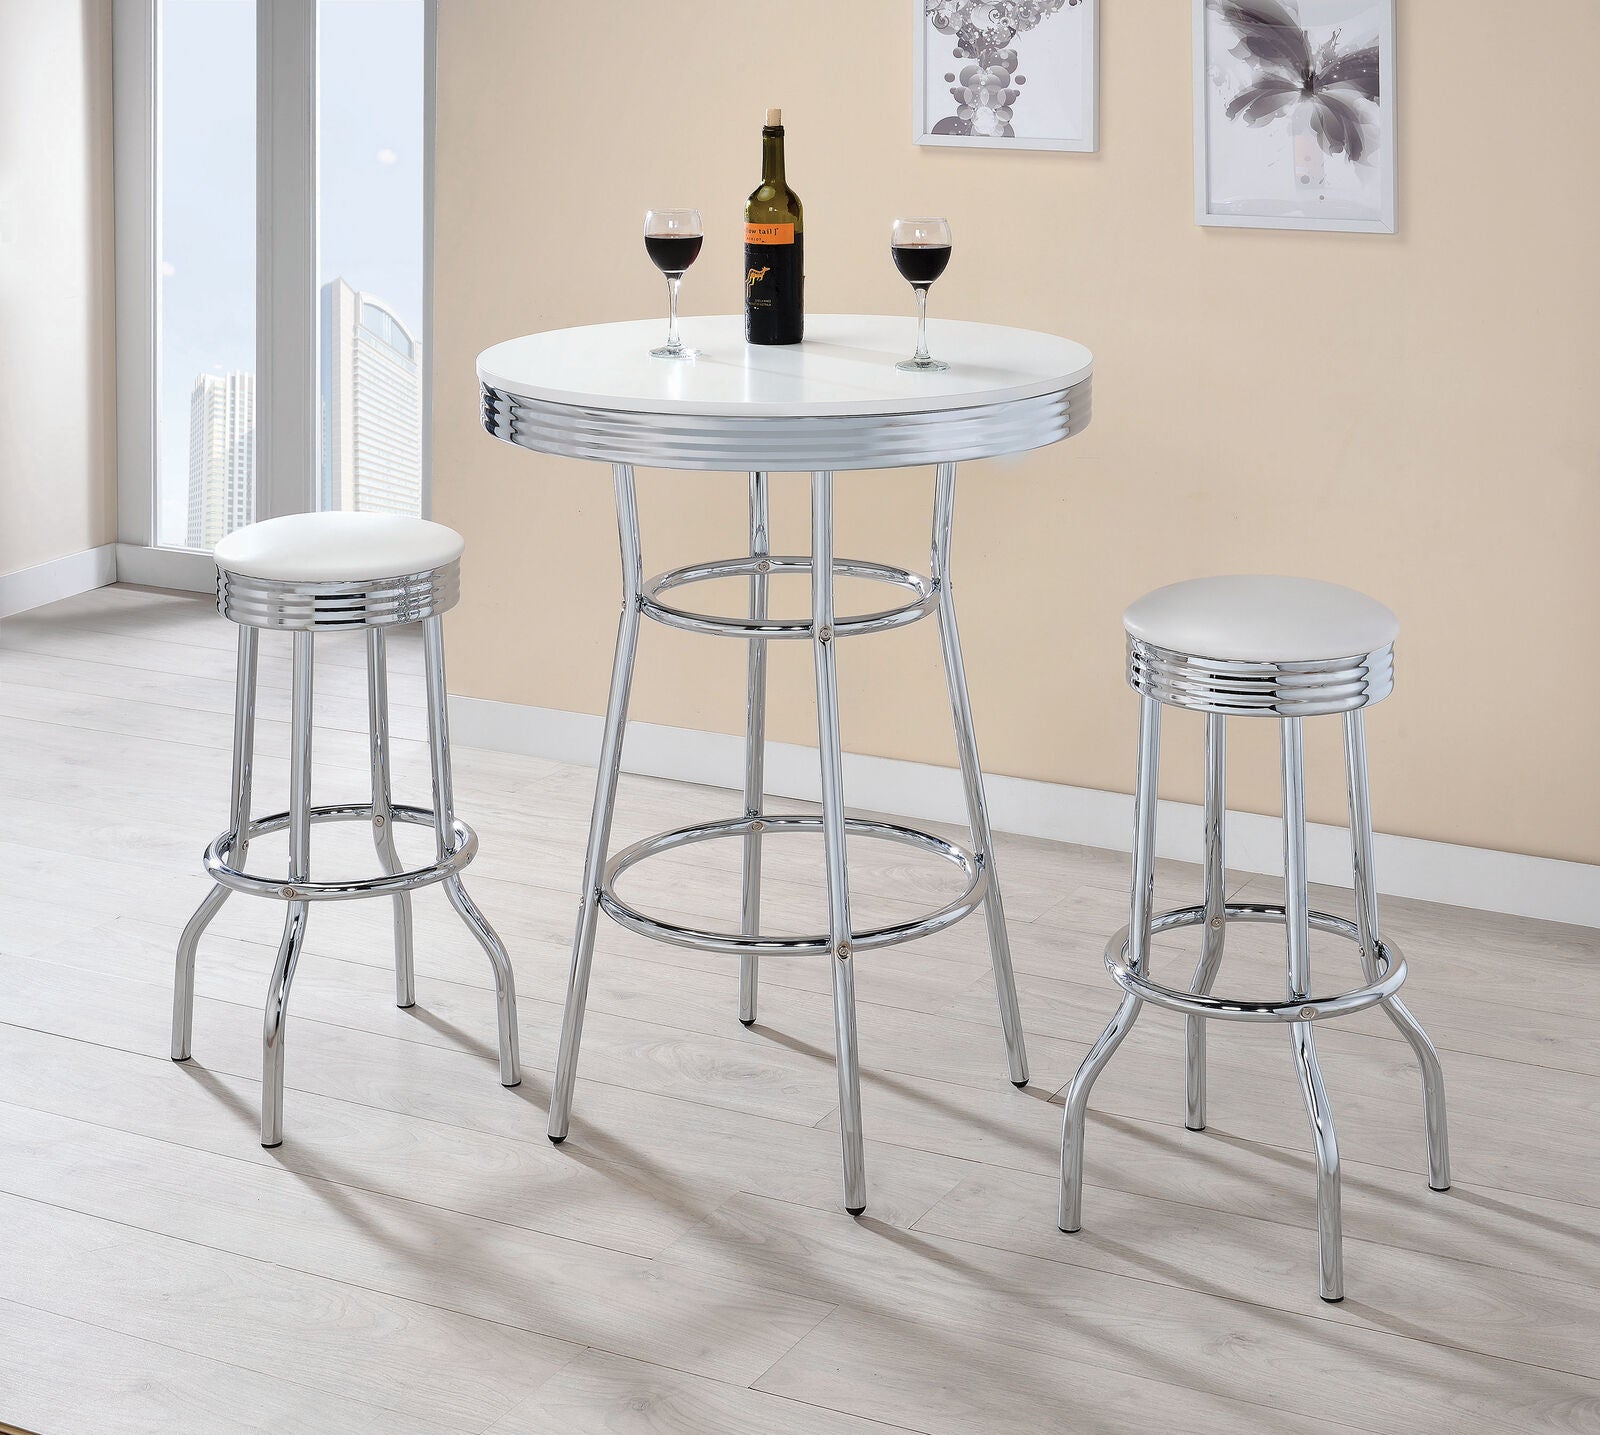 3 Piece 50's Retro Theodore Round Bar Table and Stool Set Chrome and Glossy White